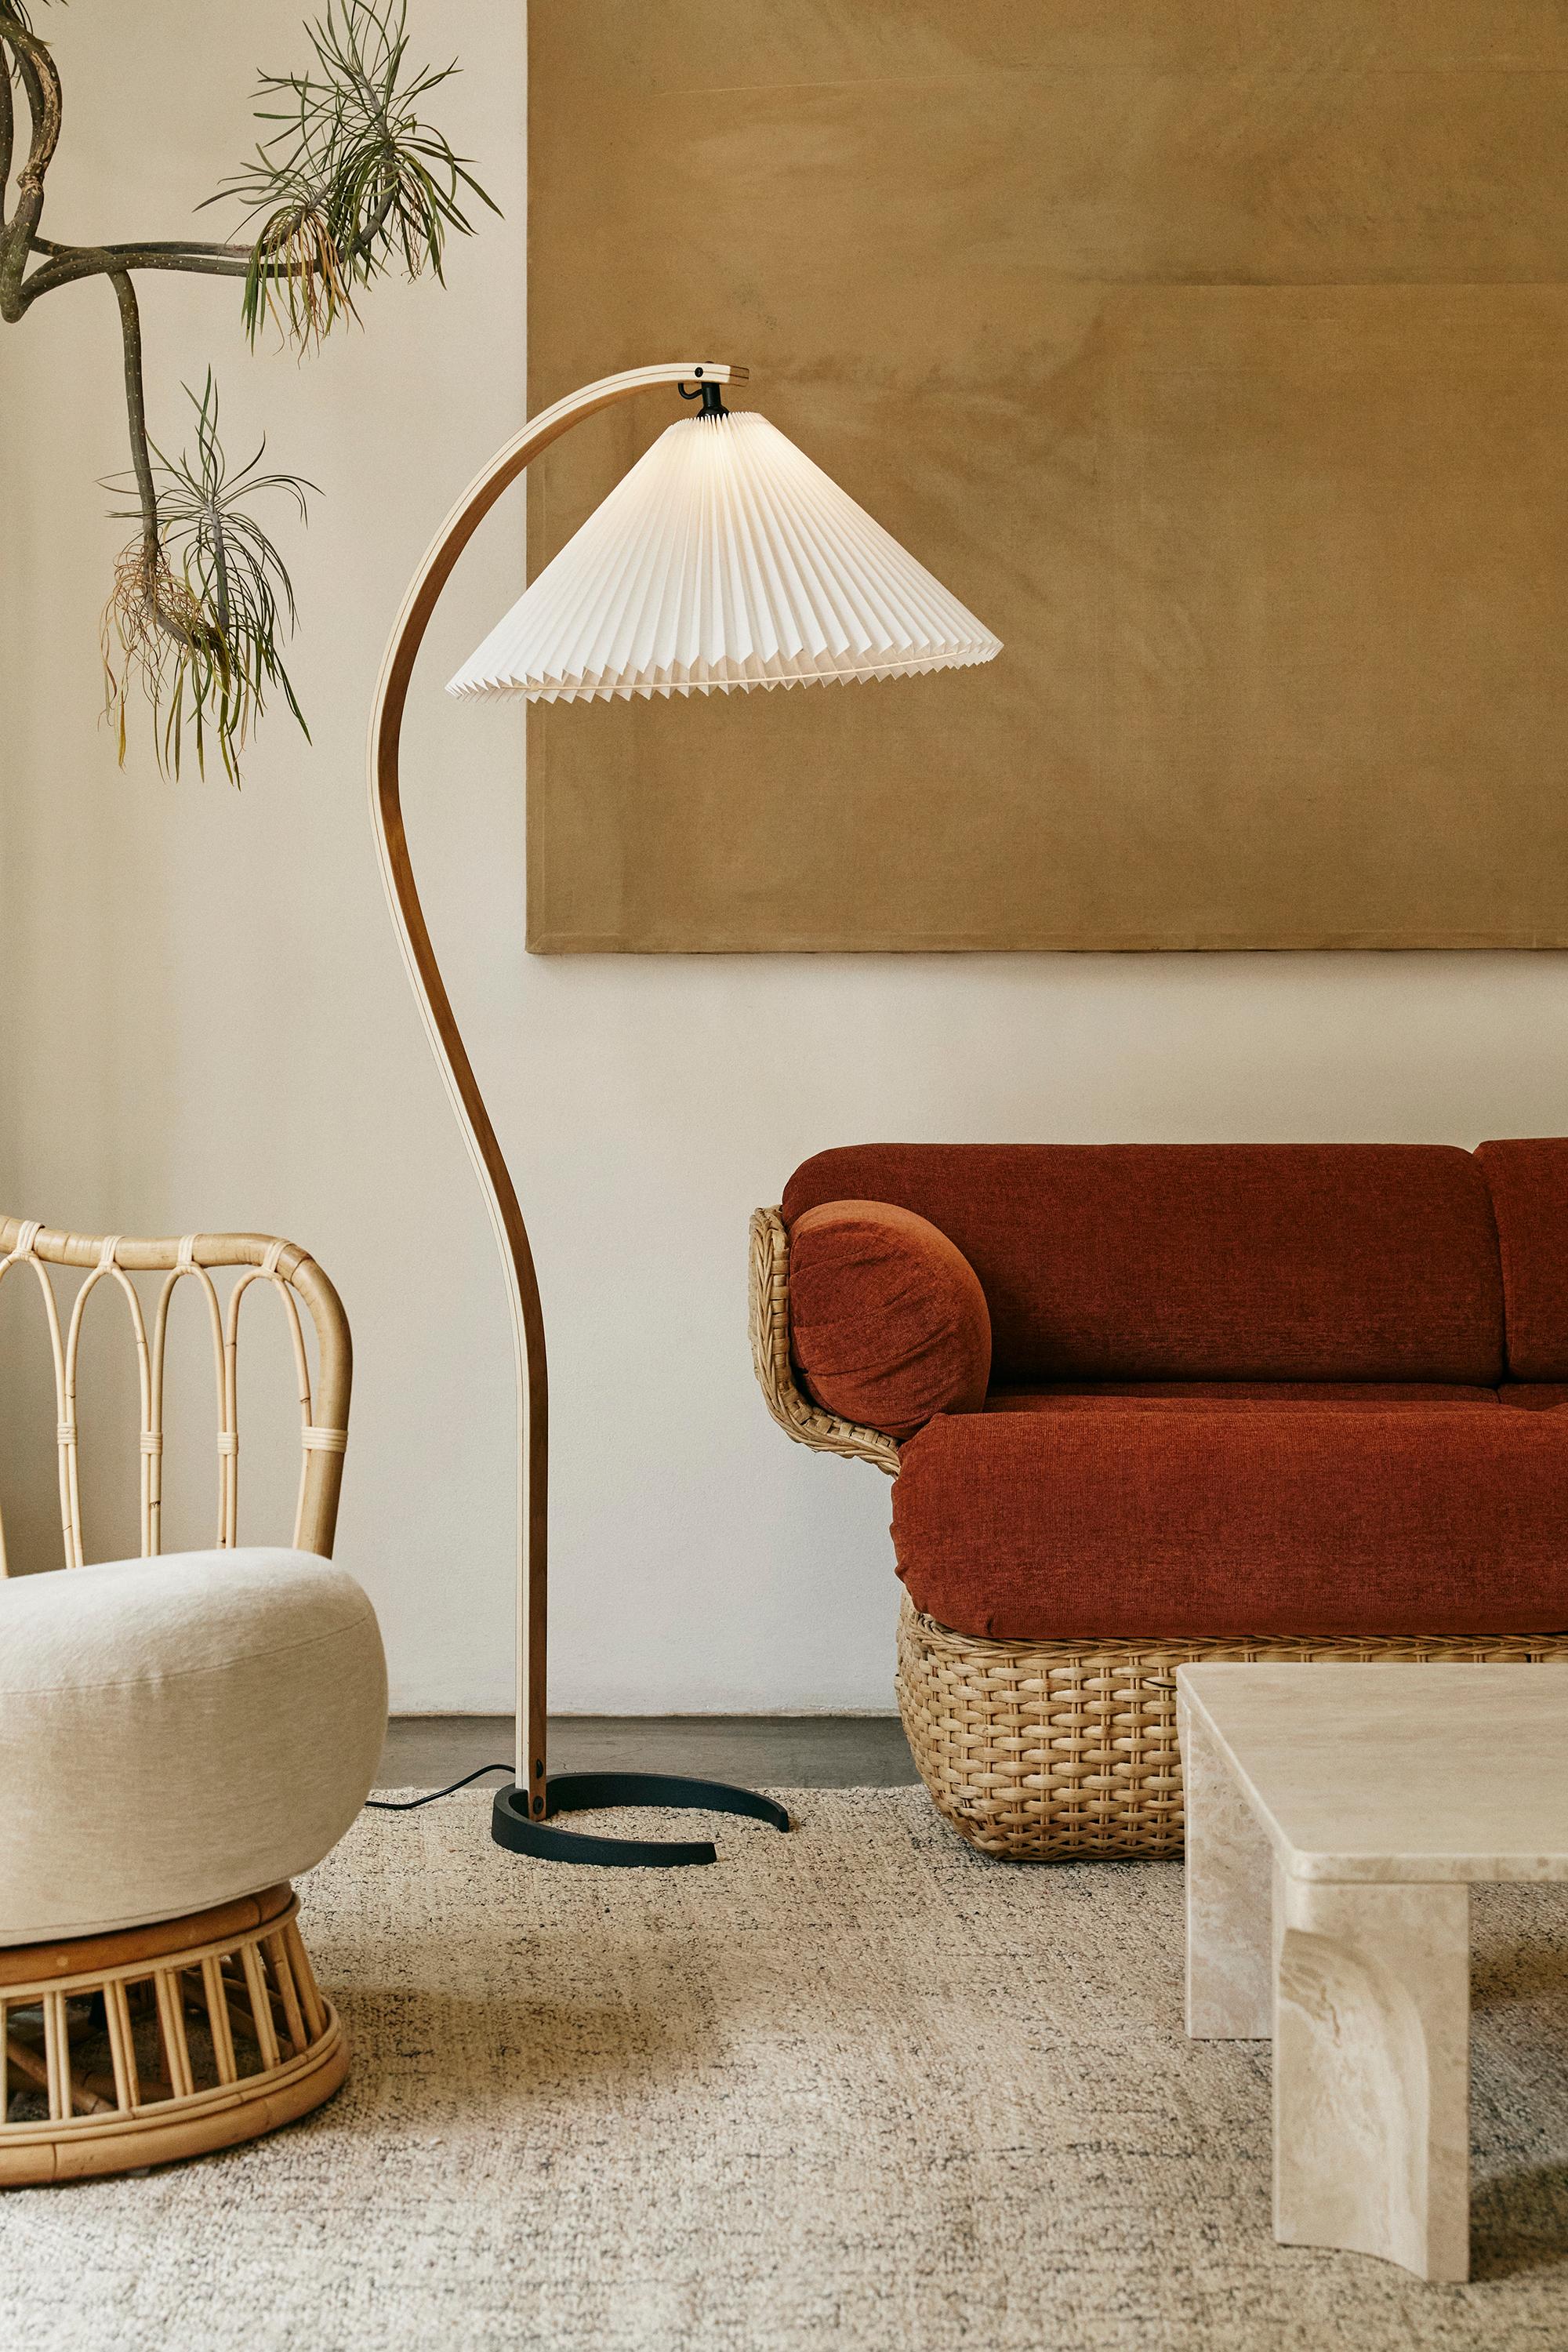 'Timberline' floor lamp for GUBI.

Originally designed by Mads Caprani in the 1970s, this authorized GUBI re-edition is executed in oak, birch, canvas on a cast-iron base. Like the original, the new Timberline balances form and function to provide